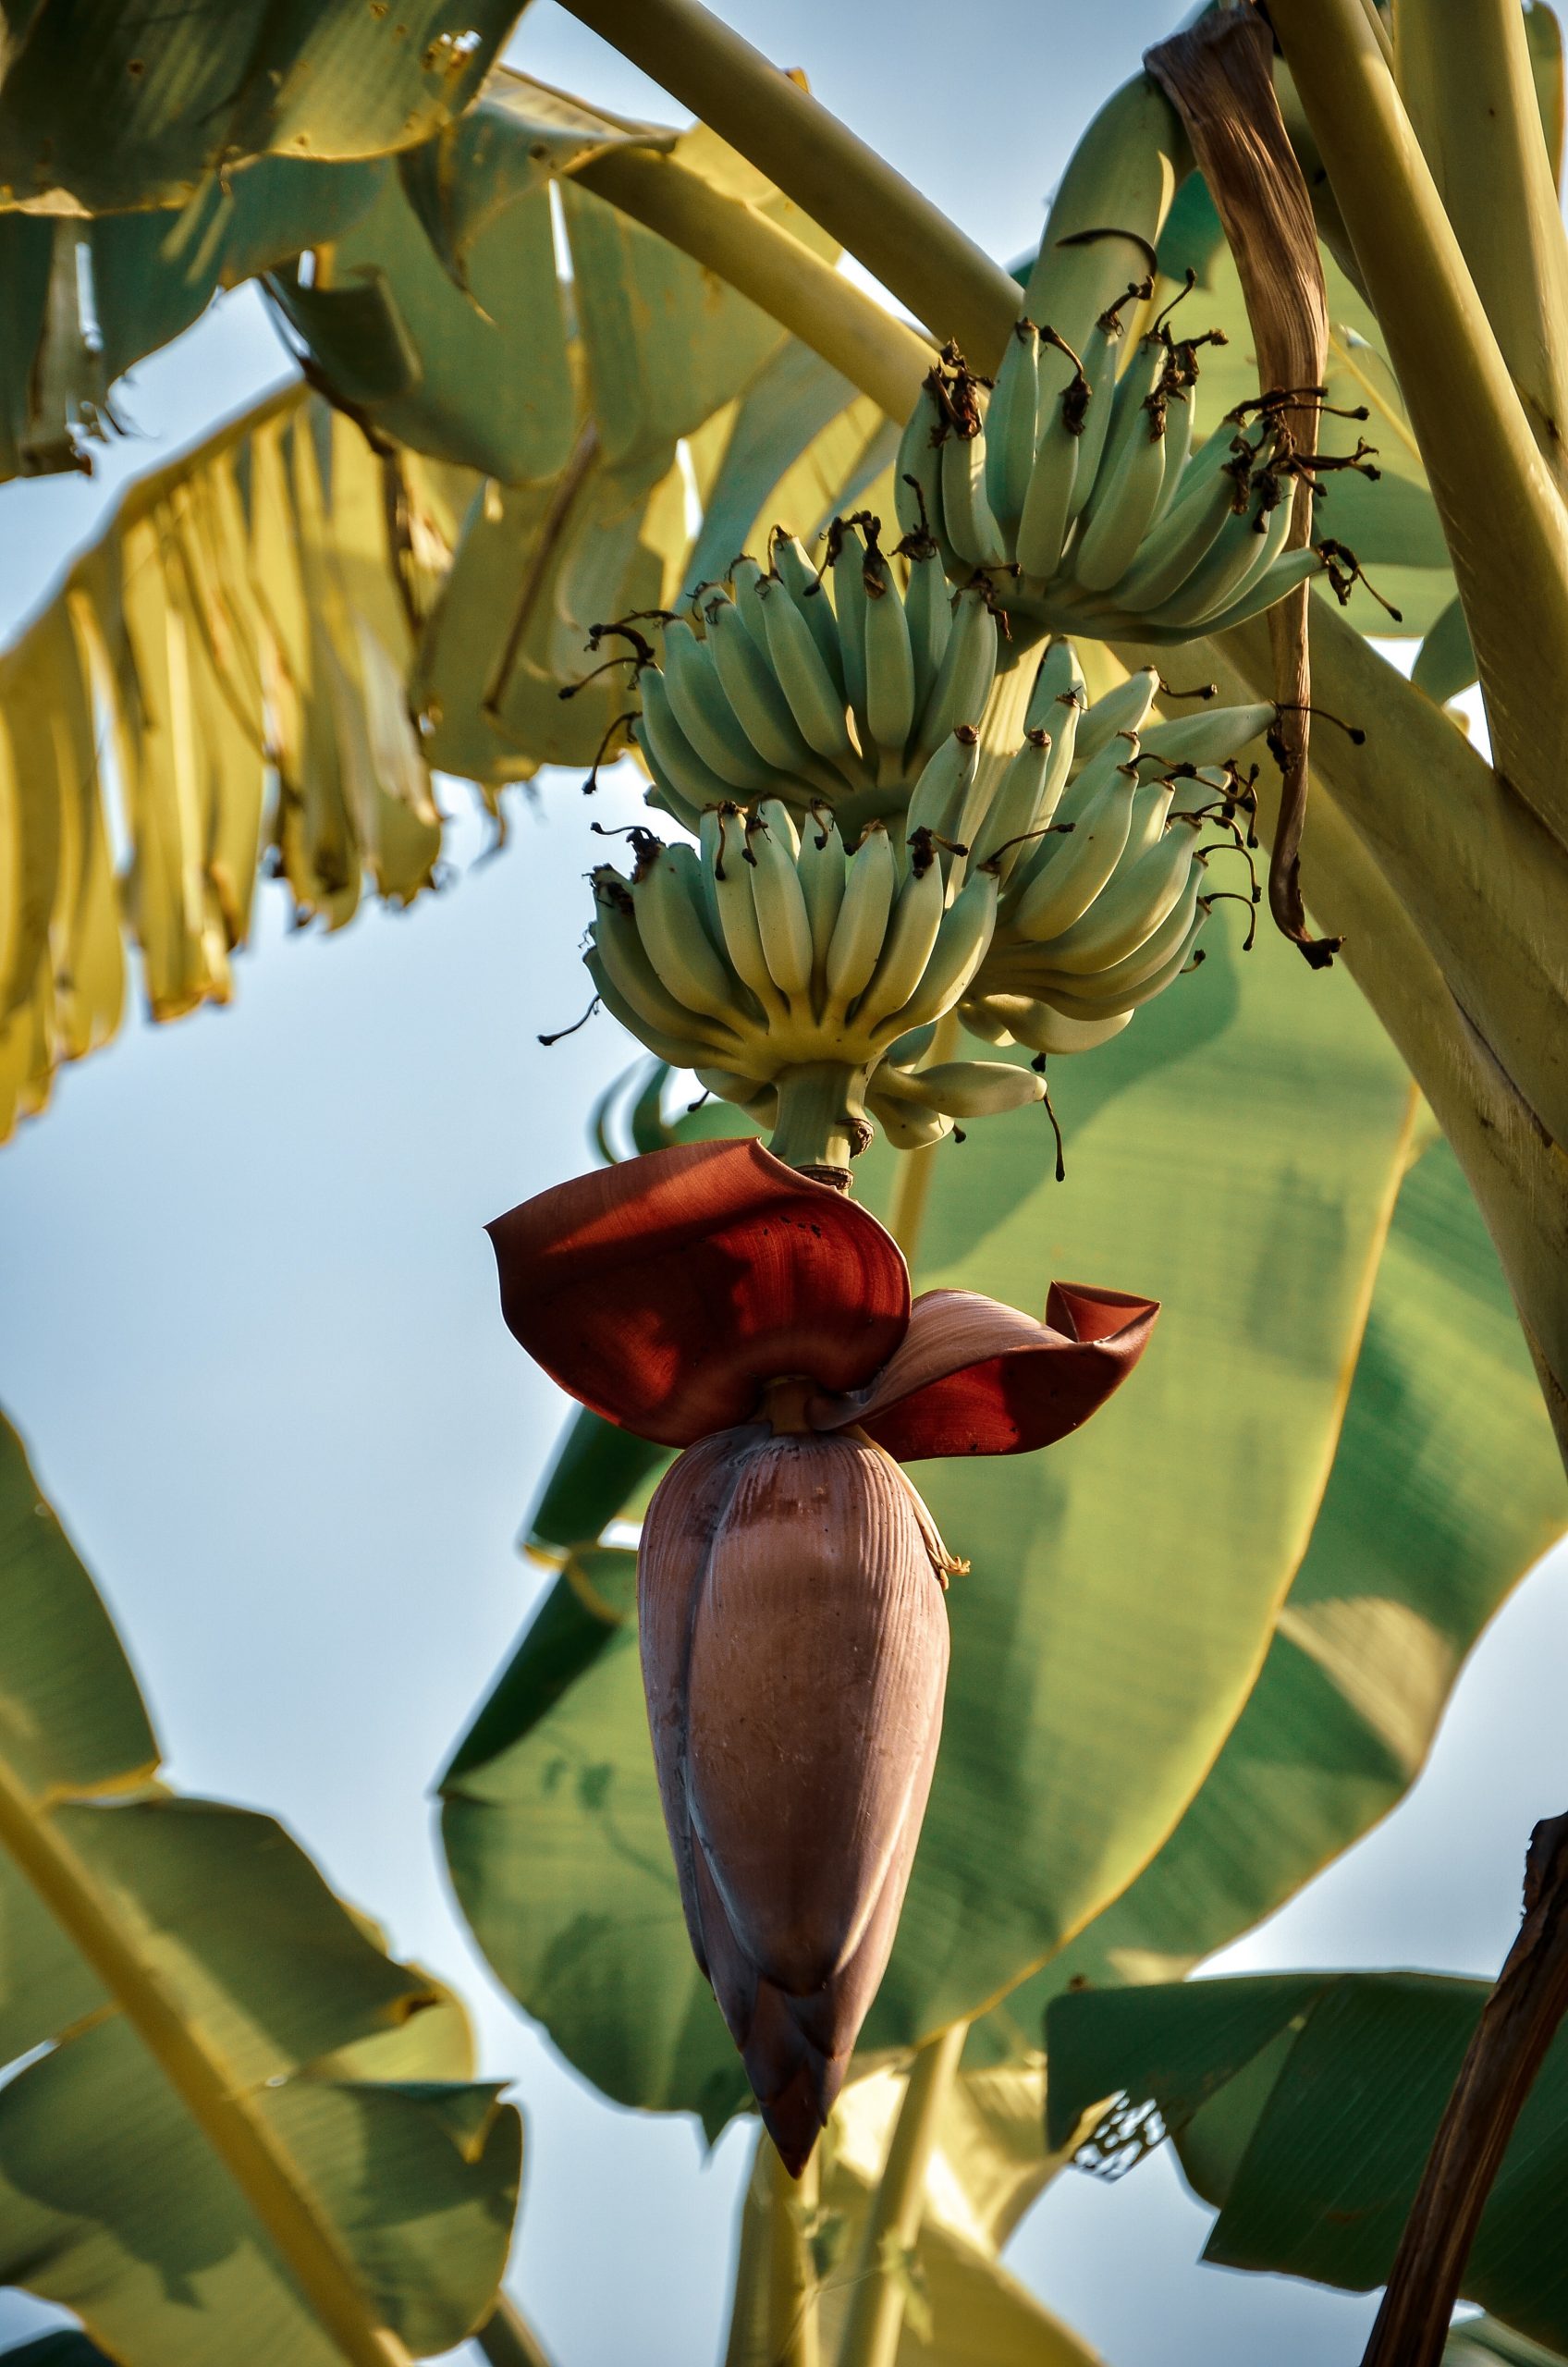 Bananas growing on a large banana tree surrounding by full leaves.